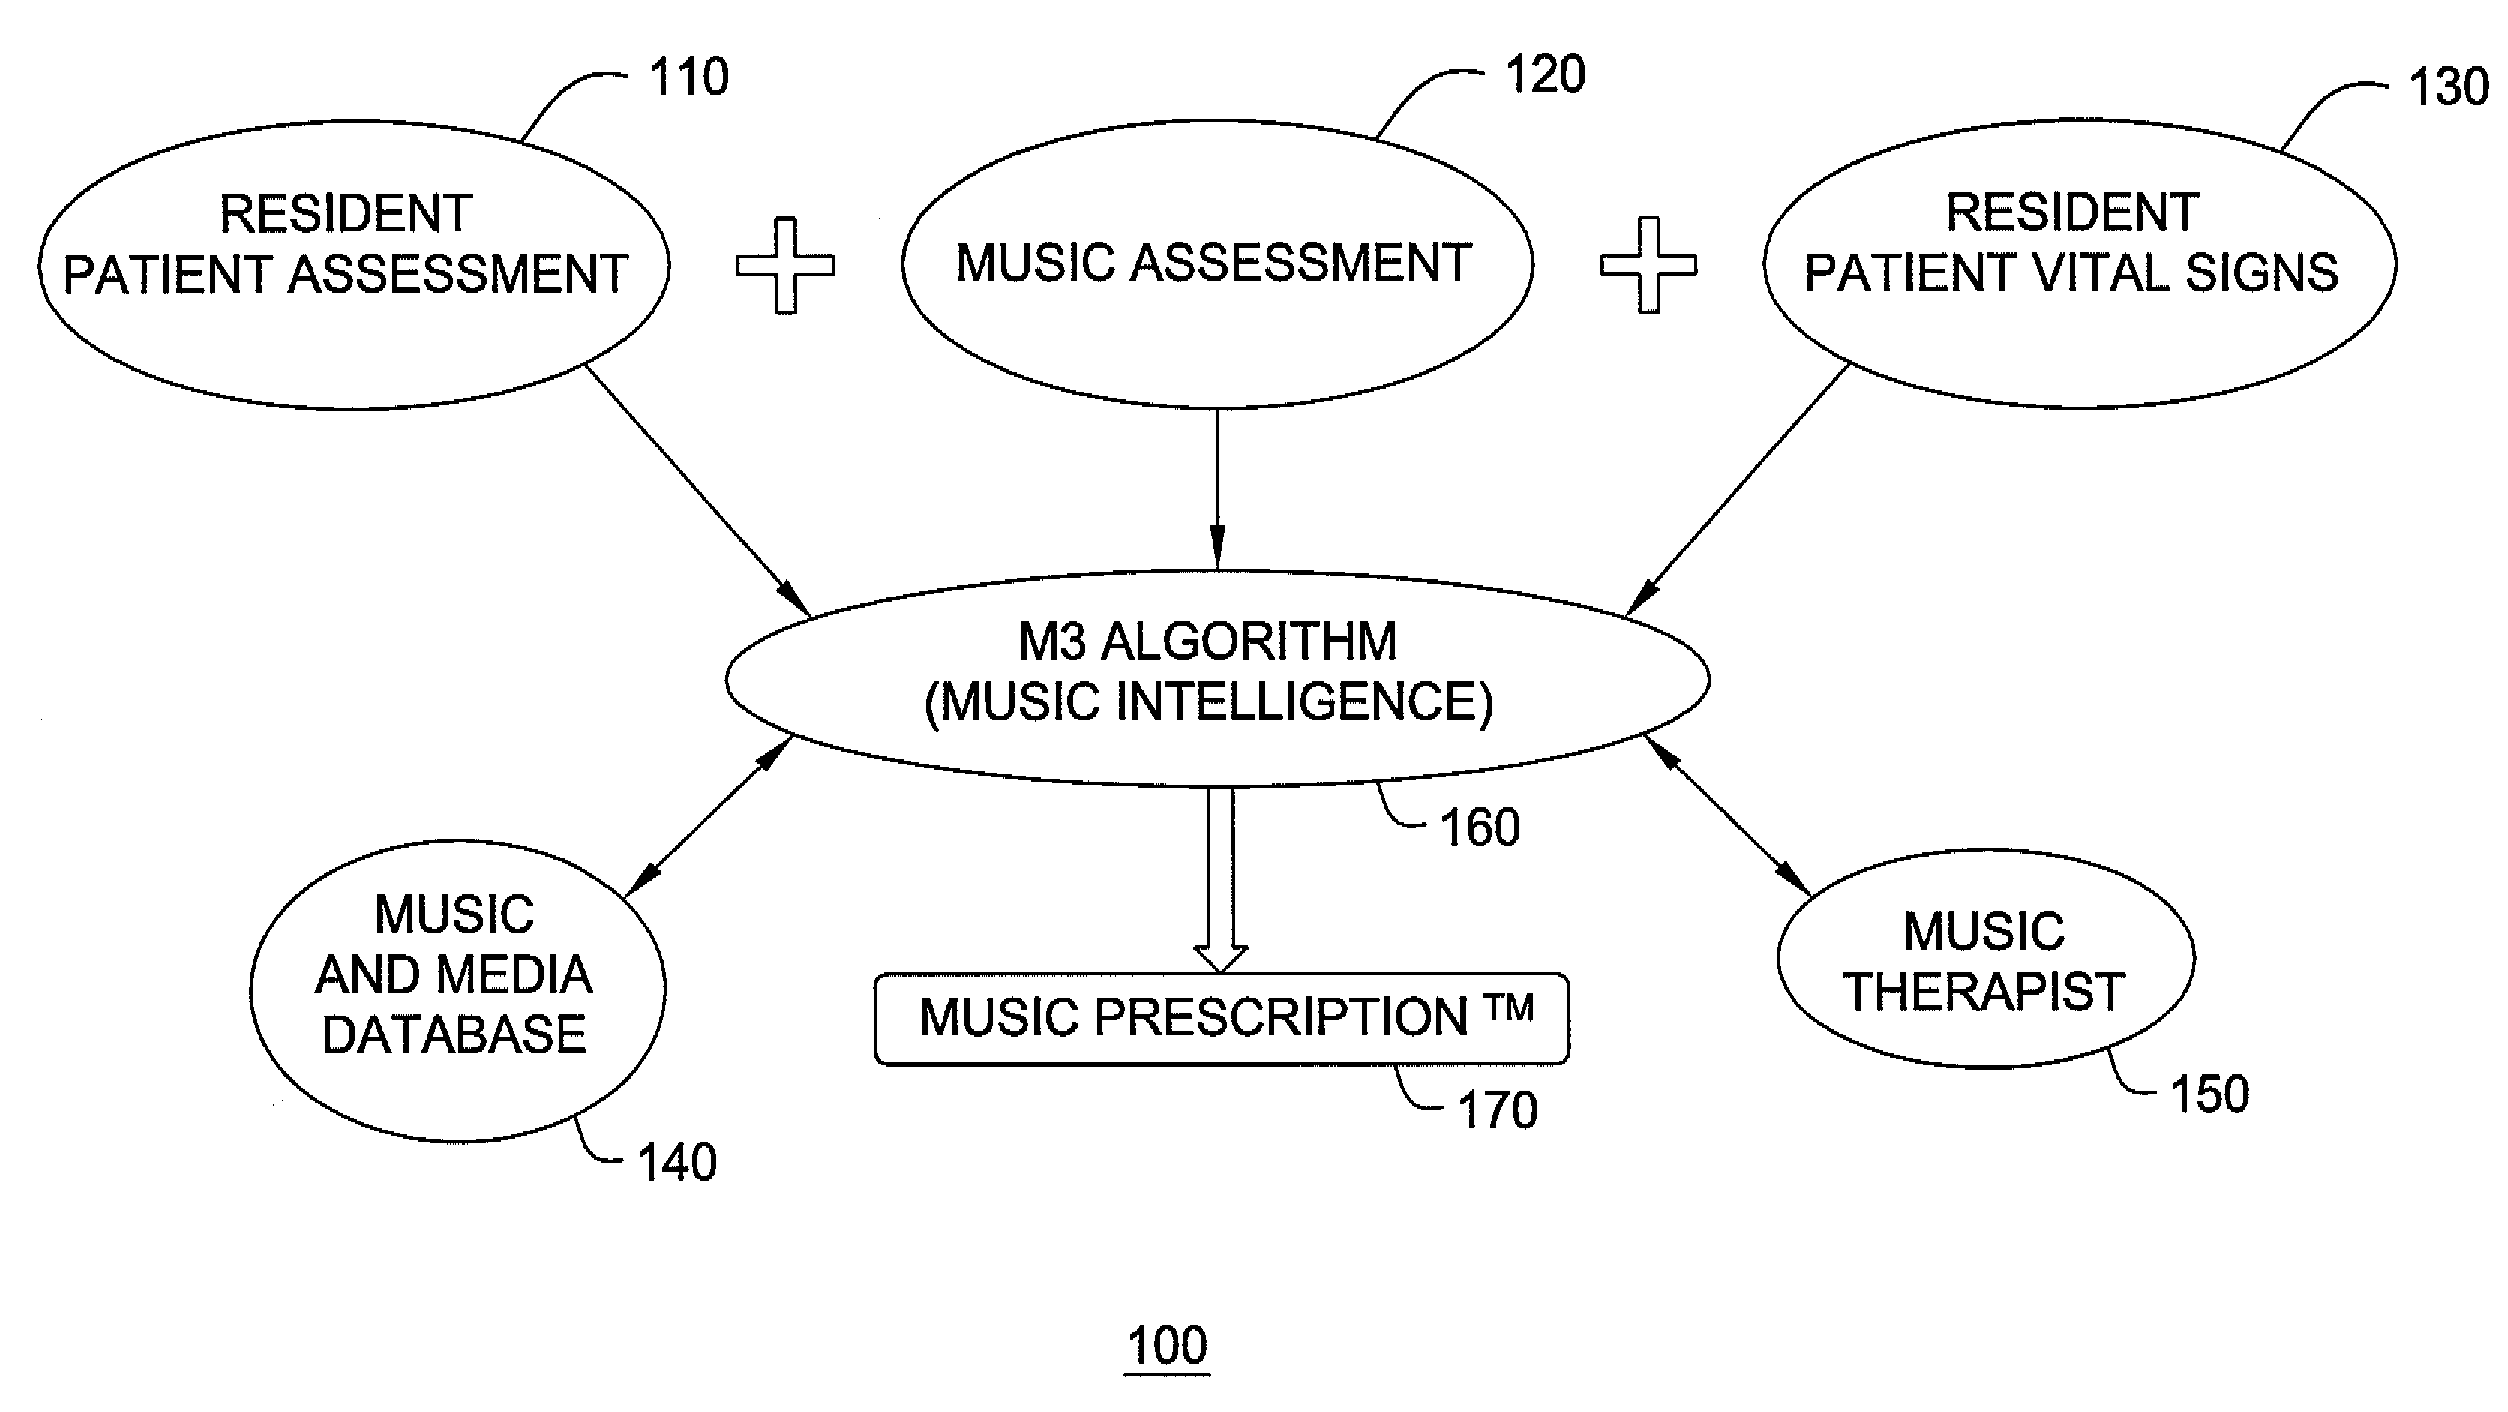 Therapeutic music and media delivery system